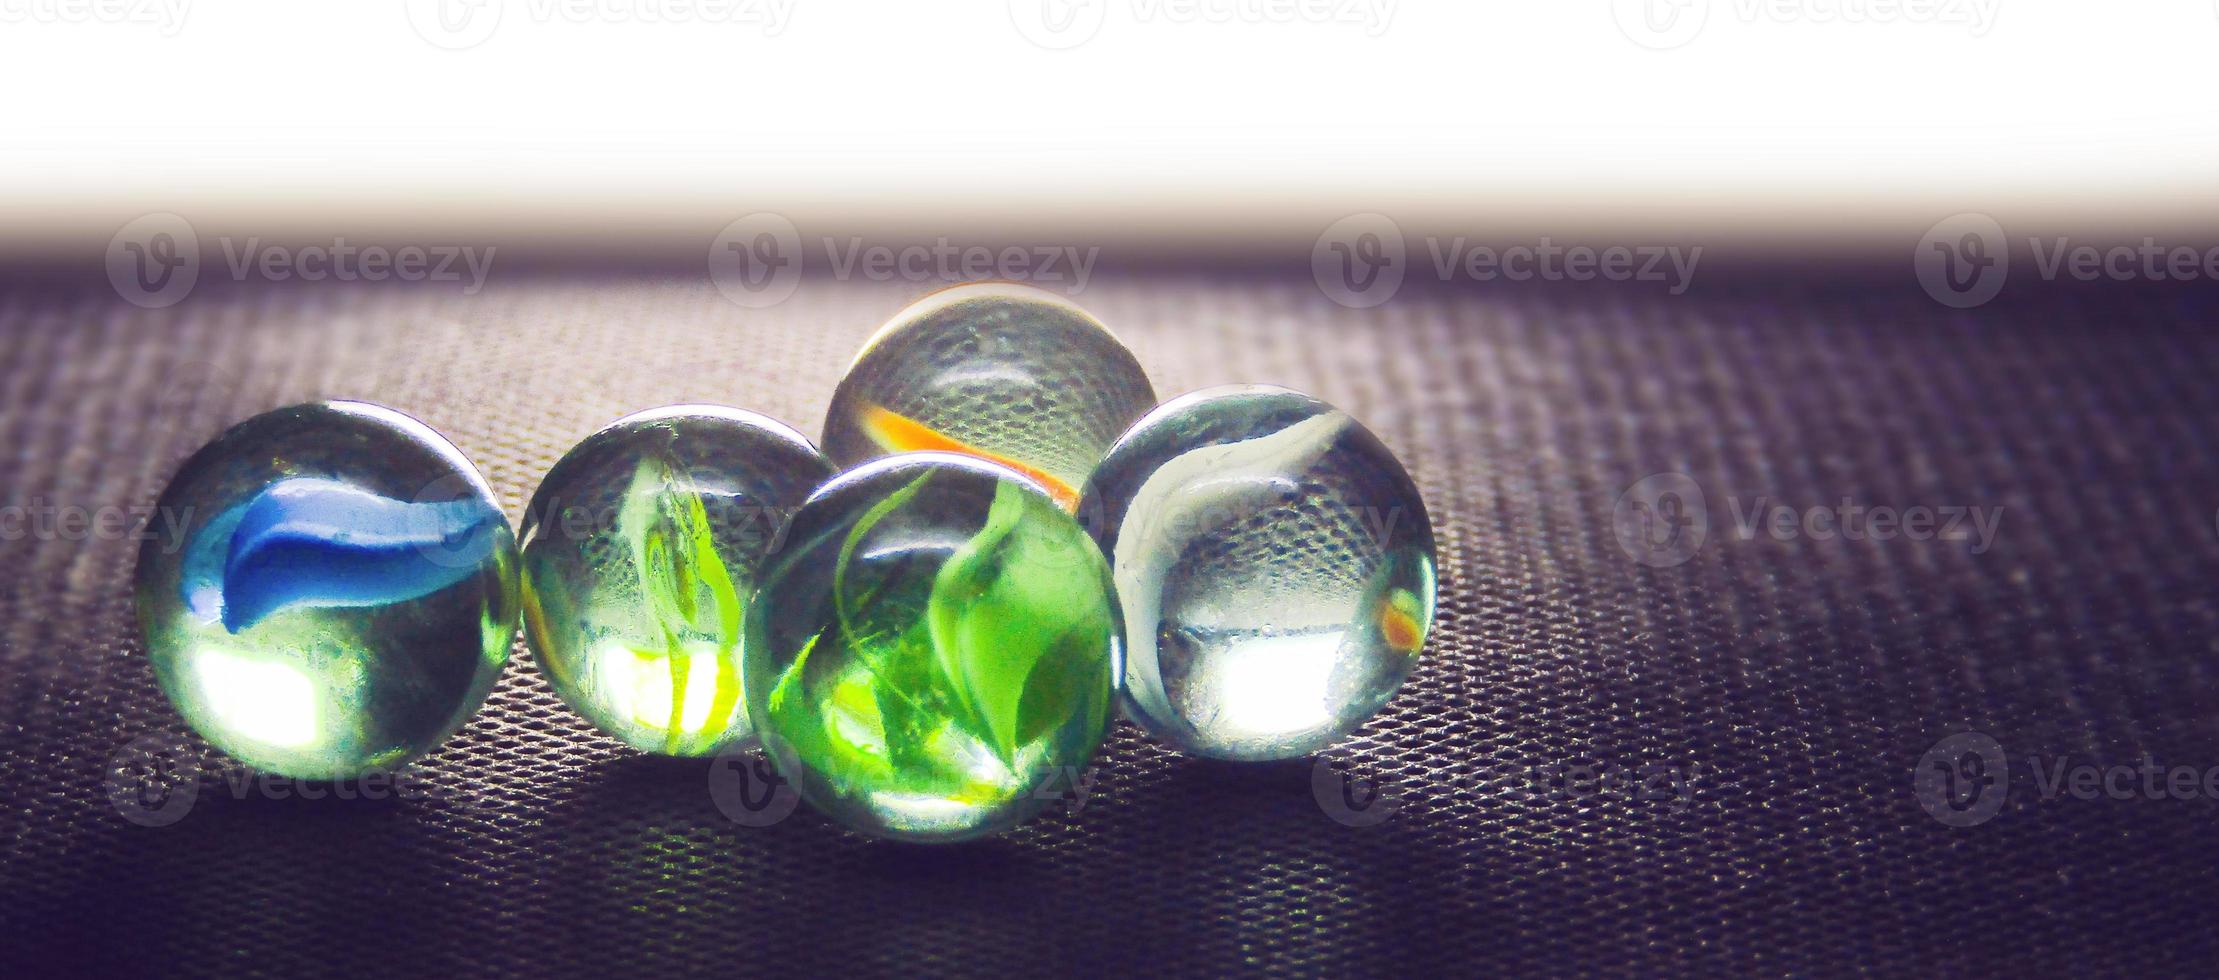 Close-up shot of glass marbles on the black table with a backlight. Diversity of marbles color photo